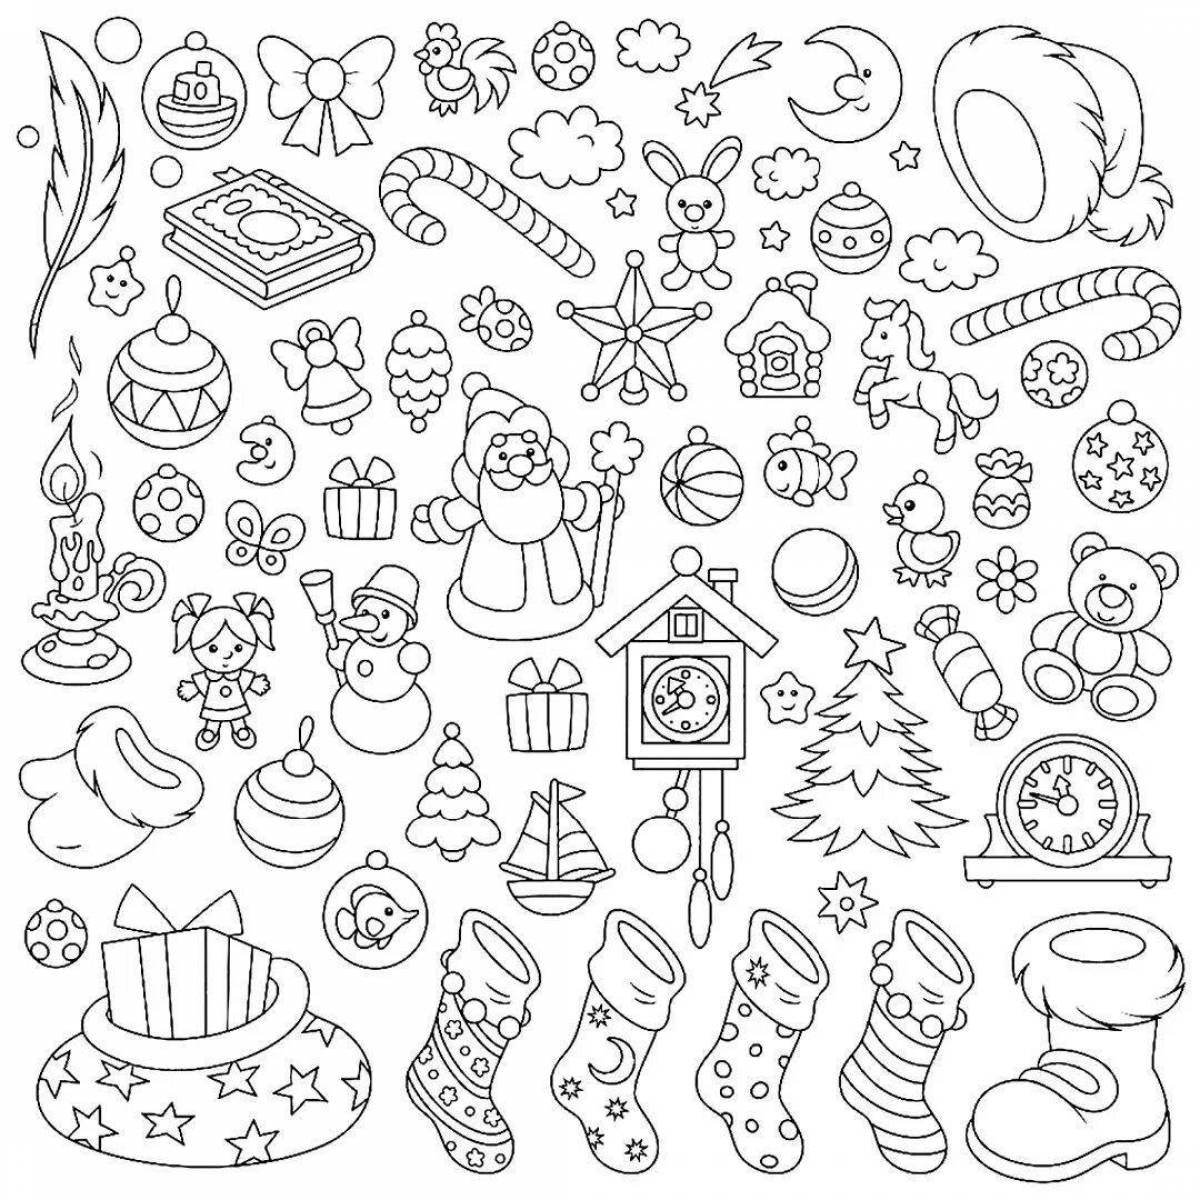 Live coloring Christmas stickers